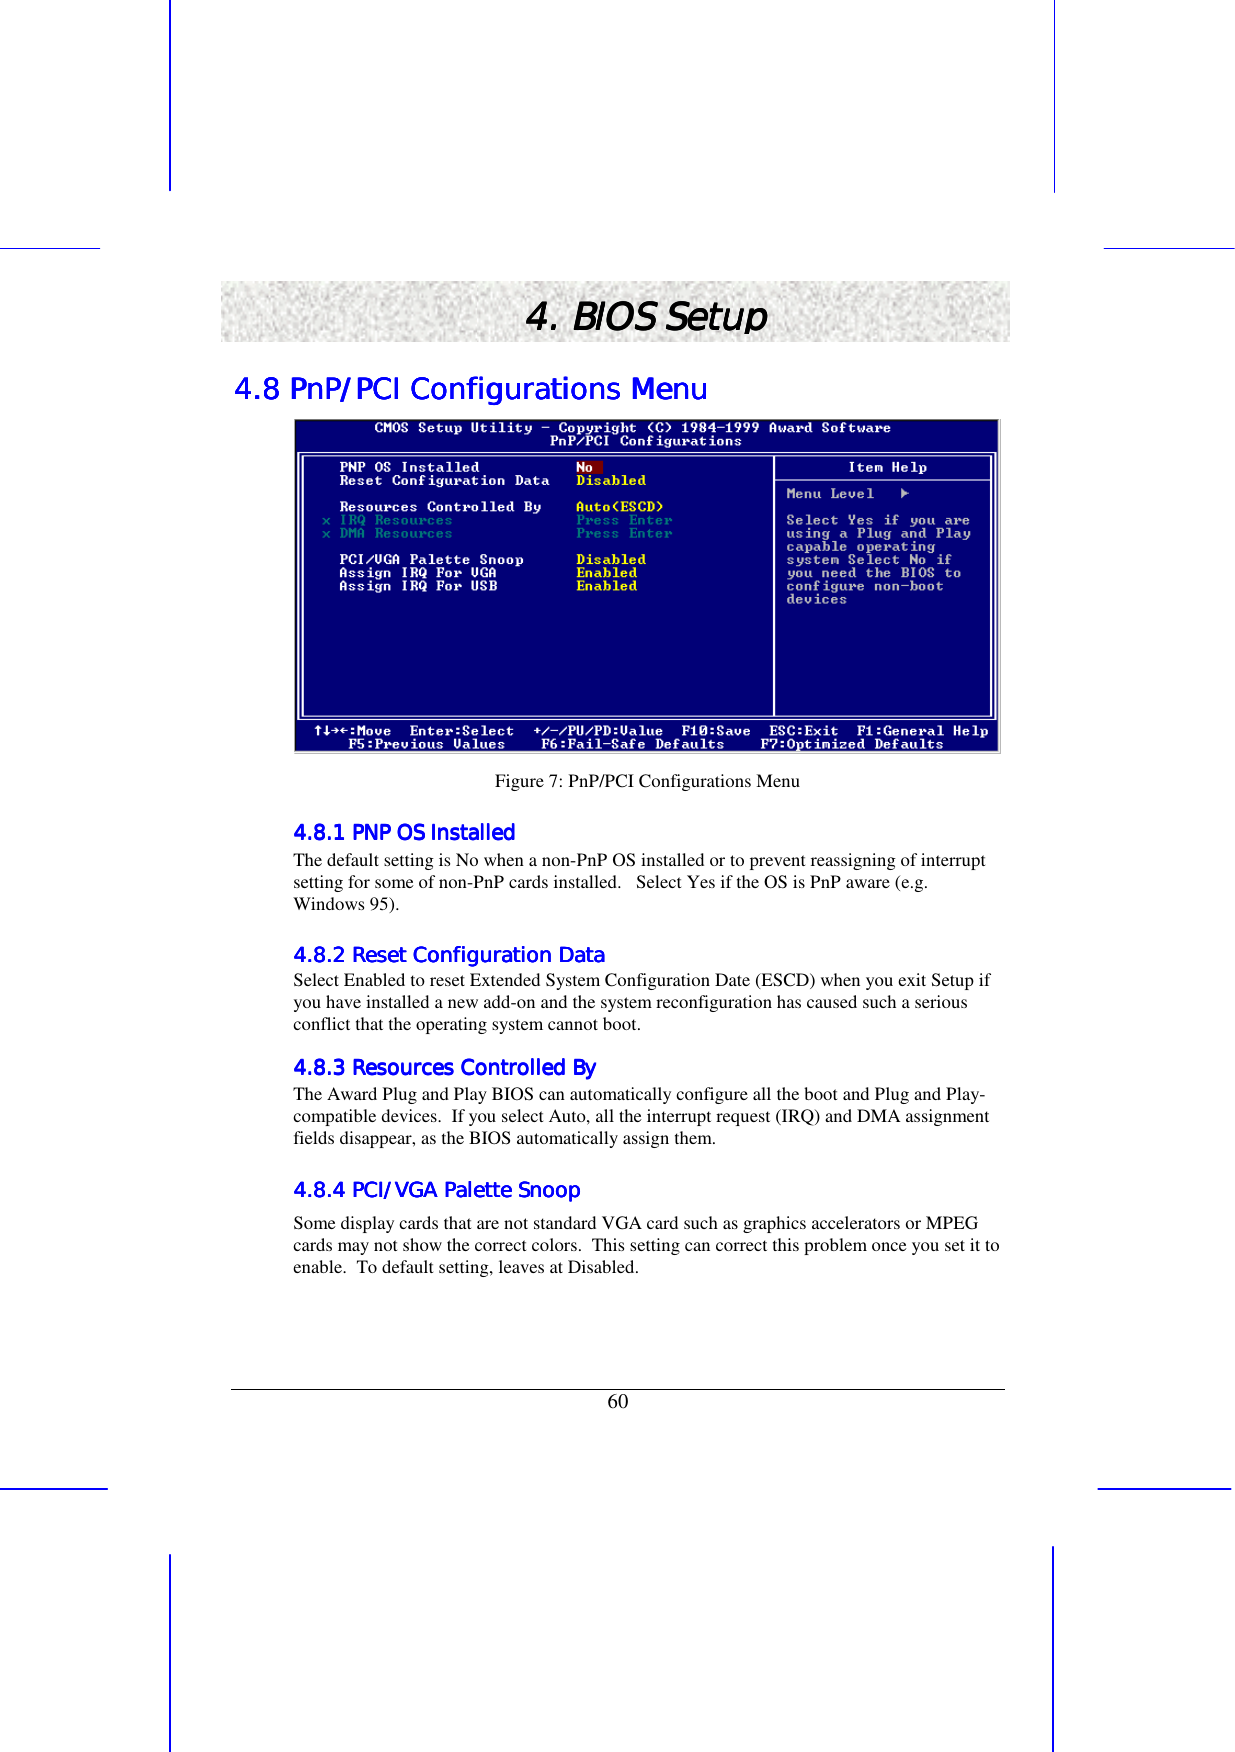   60 4. BIOS Setup4. BIOS Setup4. BIOS Setup4. BIOS Setup    4.8 PnP/PCI Configurations Menu4.8 PnP/PCI Configurations Menu4.8 PnP/PCI Configurations Menu4.8 PnP/PCI Configurations Menu     Figure 7: PnP/PCI Configurations Menu 4.8.1 PNP OS Installed4.8.1 PNP OS Installed4.8.1 PNP OS Installed4.8.1 PNP OS Installed    The default setting is No when a non-PnP OS installed or to prevent reassigning of interrupt setting for some of non-PnP cards installed.   Select Yes if the OS is PnP aware (e.g. Windows 95). 4.8.2 Reset Configuration Data4.8.2 Reset Configuration Data4.8.2 Reset Configuration Data4.8.2 Reset Configuration Data    Select Enabled to reset Extended System Configuration Date (ESCD) when you exit Setup if you have installed a new add-on and the system reconfiguration has caused such a serious conflict that the operating system cannot boot. 4.8.3 Resources Controlled By4.8.3 Resources Controlled By4.8.3 Resources Controlled By4.8.3 Resources Controlled By    The Award Plug and Play BIOS can automatically configure all the boot and Plug and Play-compatible devices.  If you select Auto, all the interrupt request (IRQ) and DMA assignment fields disappear, as the BIOS automatically assign them. 4.8.4 PCI/VGA Palette Snoop4.8.4 PCI/VGA Palette Snoop4.8.4 PCI/VGA Palette Snoop4.8.4 PCI/VGA Palette Snoop    Some display cards that are not standard VGA card such as graphics accelerators or MPEG cards may not show the correct colors.  This setting can correct this problem once you set it to enable.  To default setting, leaves at Disabled. 